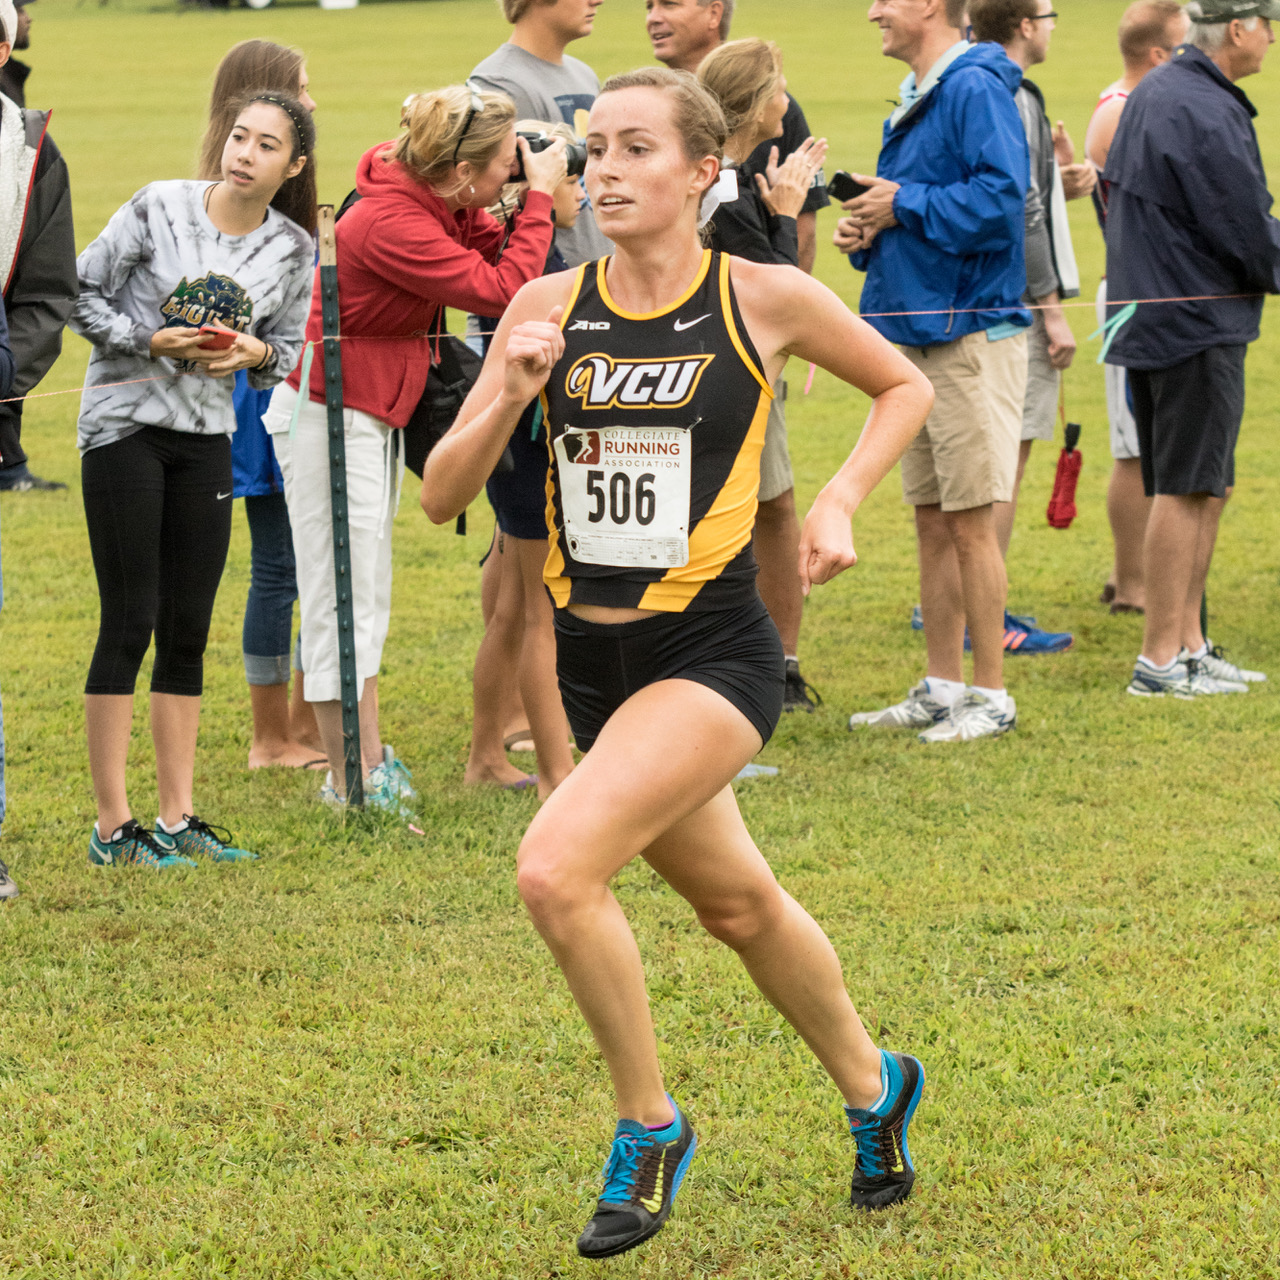 Last season, Emily Dyke clocked an 18:02.2 at the A-10 Championship to finish 21st overall. Photo provided by VCU Athletics